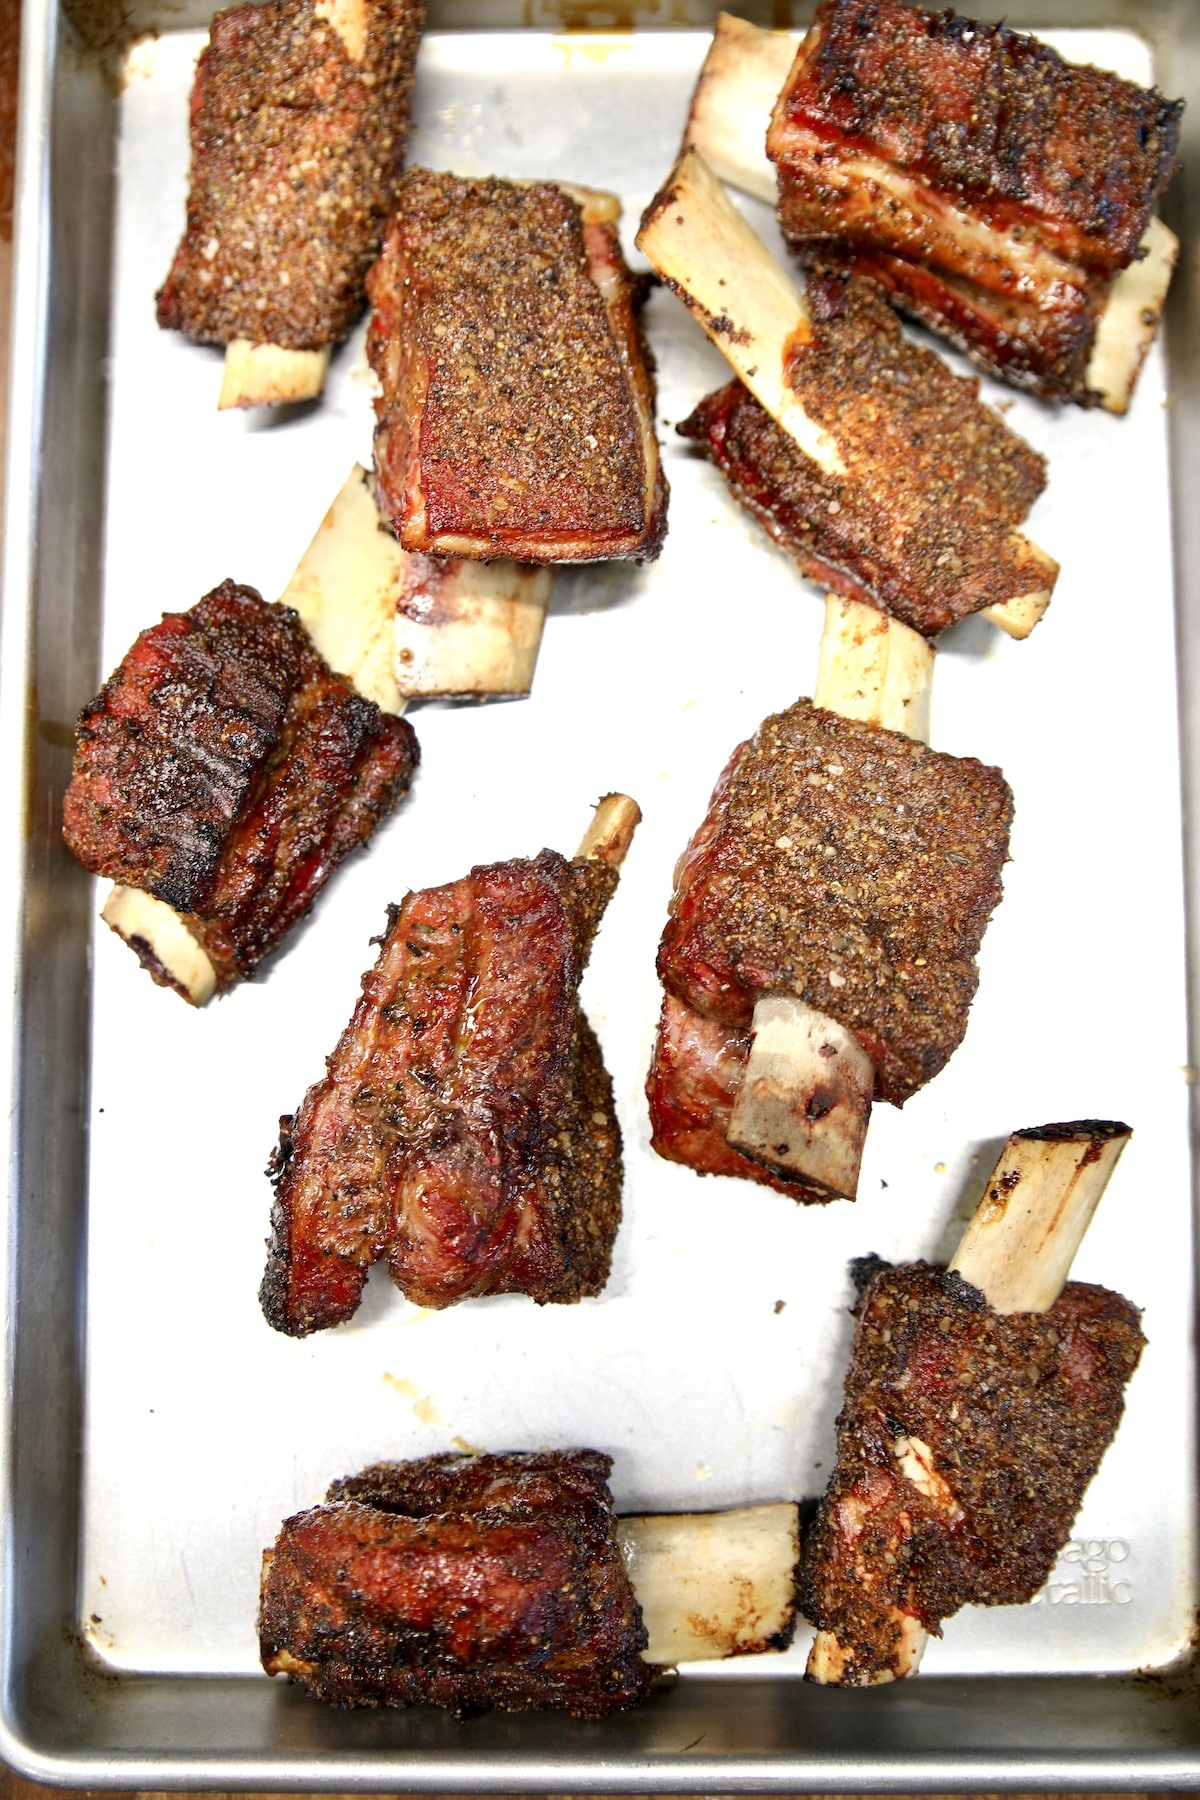 Grilled beef ribs resting on a sheet pan.